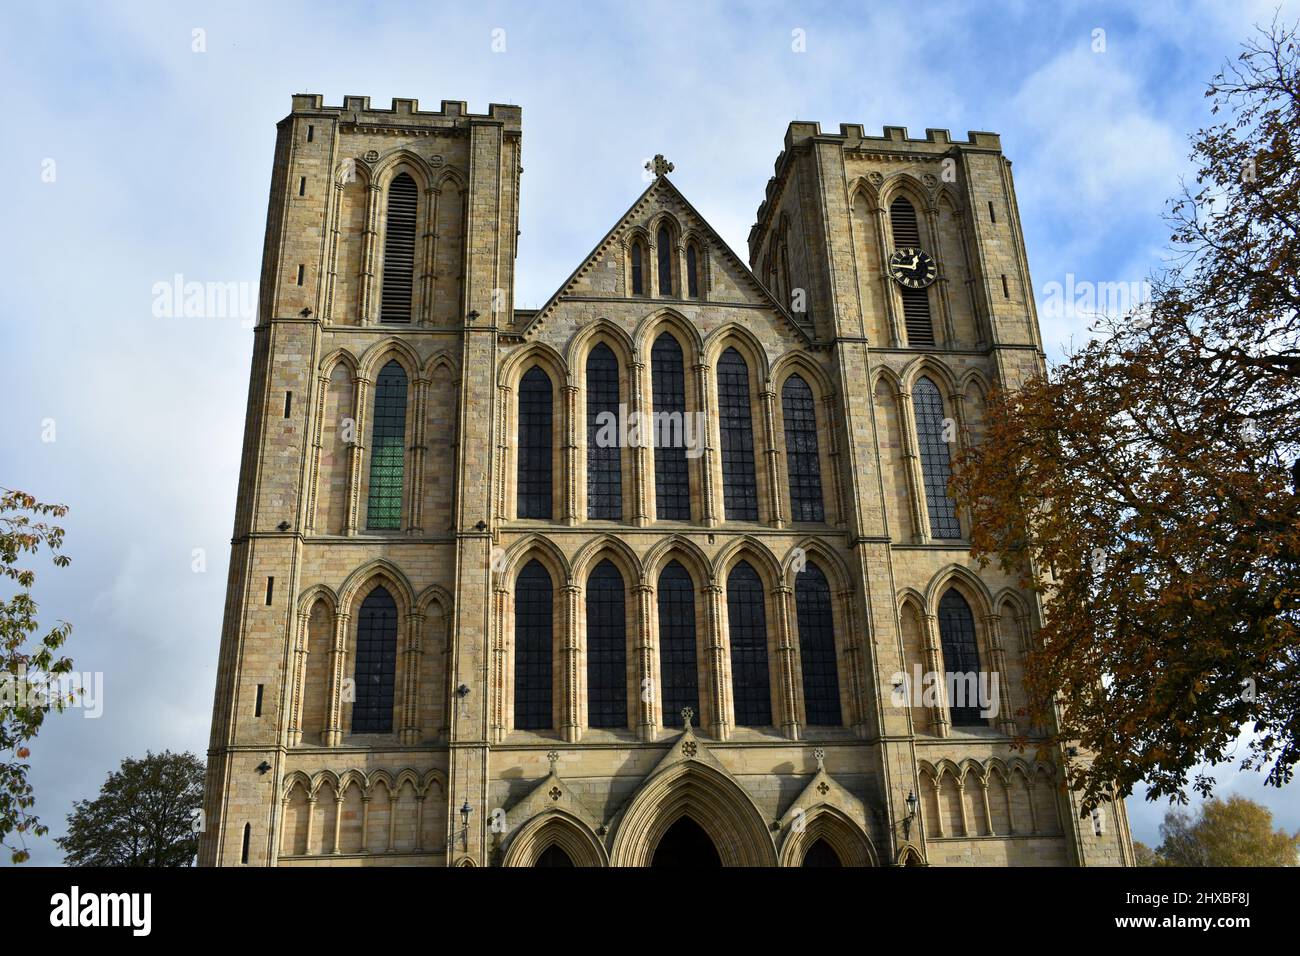 close up landscape image of majestic Ripon cathedral, the stone historical structure standing tall  on a beautiful sunny day in Autumn Stock Photo